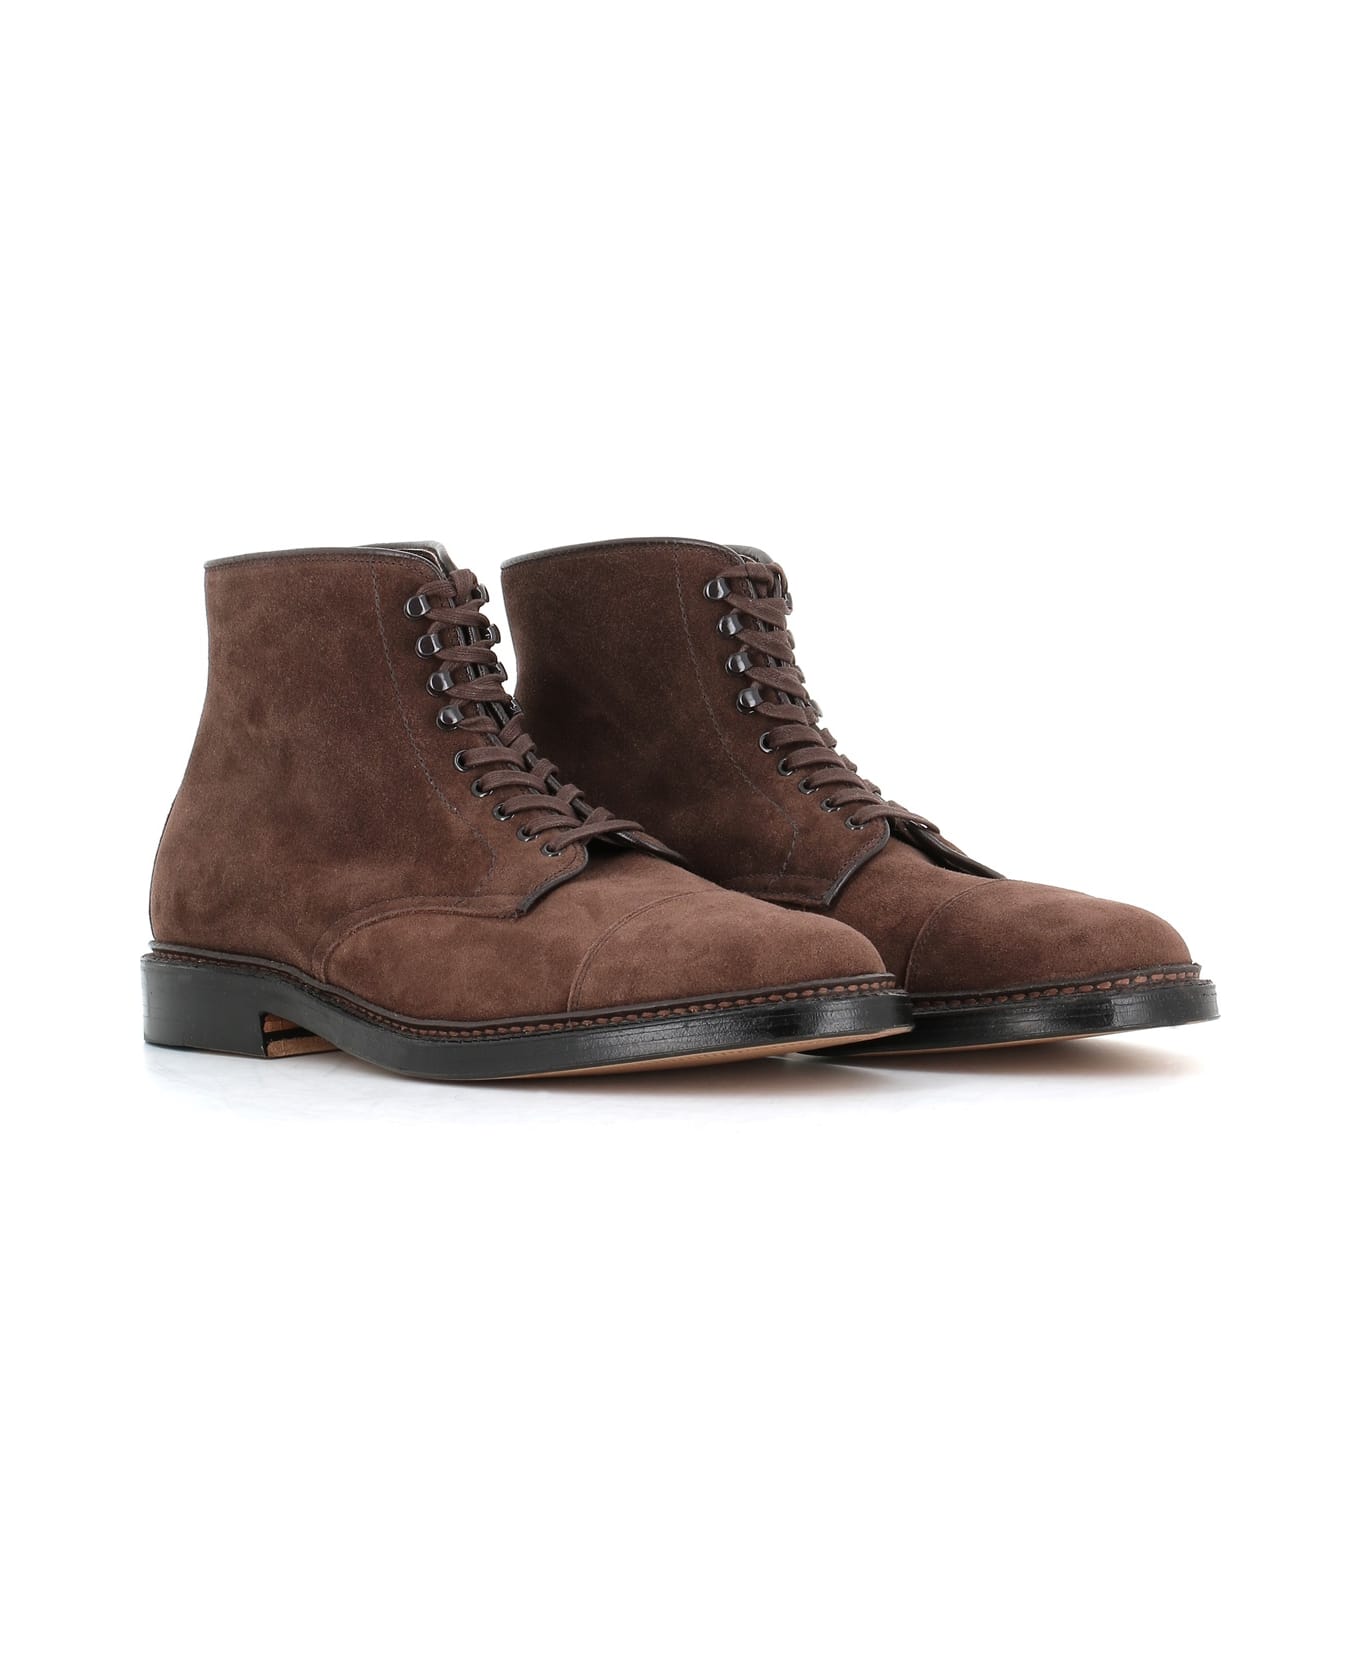 Alden Lace-up Boot 4081 Hy - Brown ブーツ